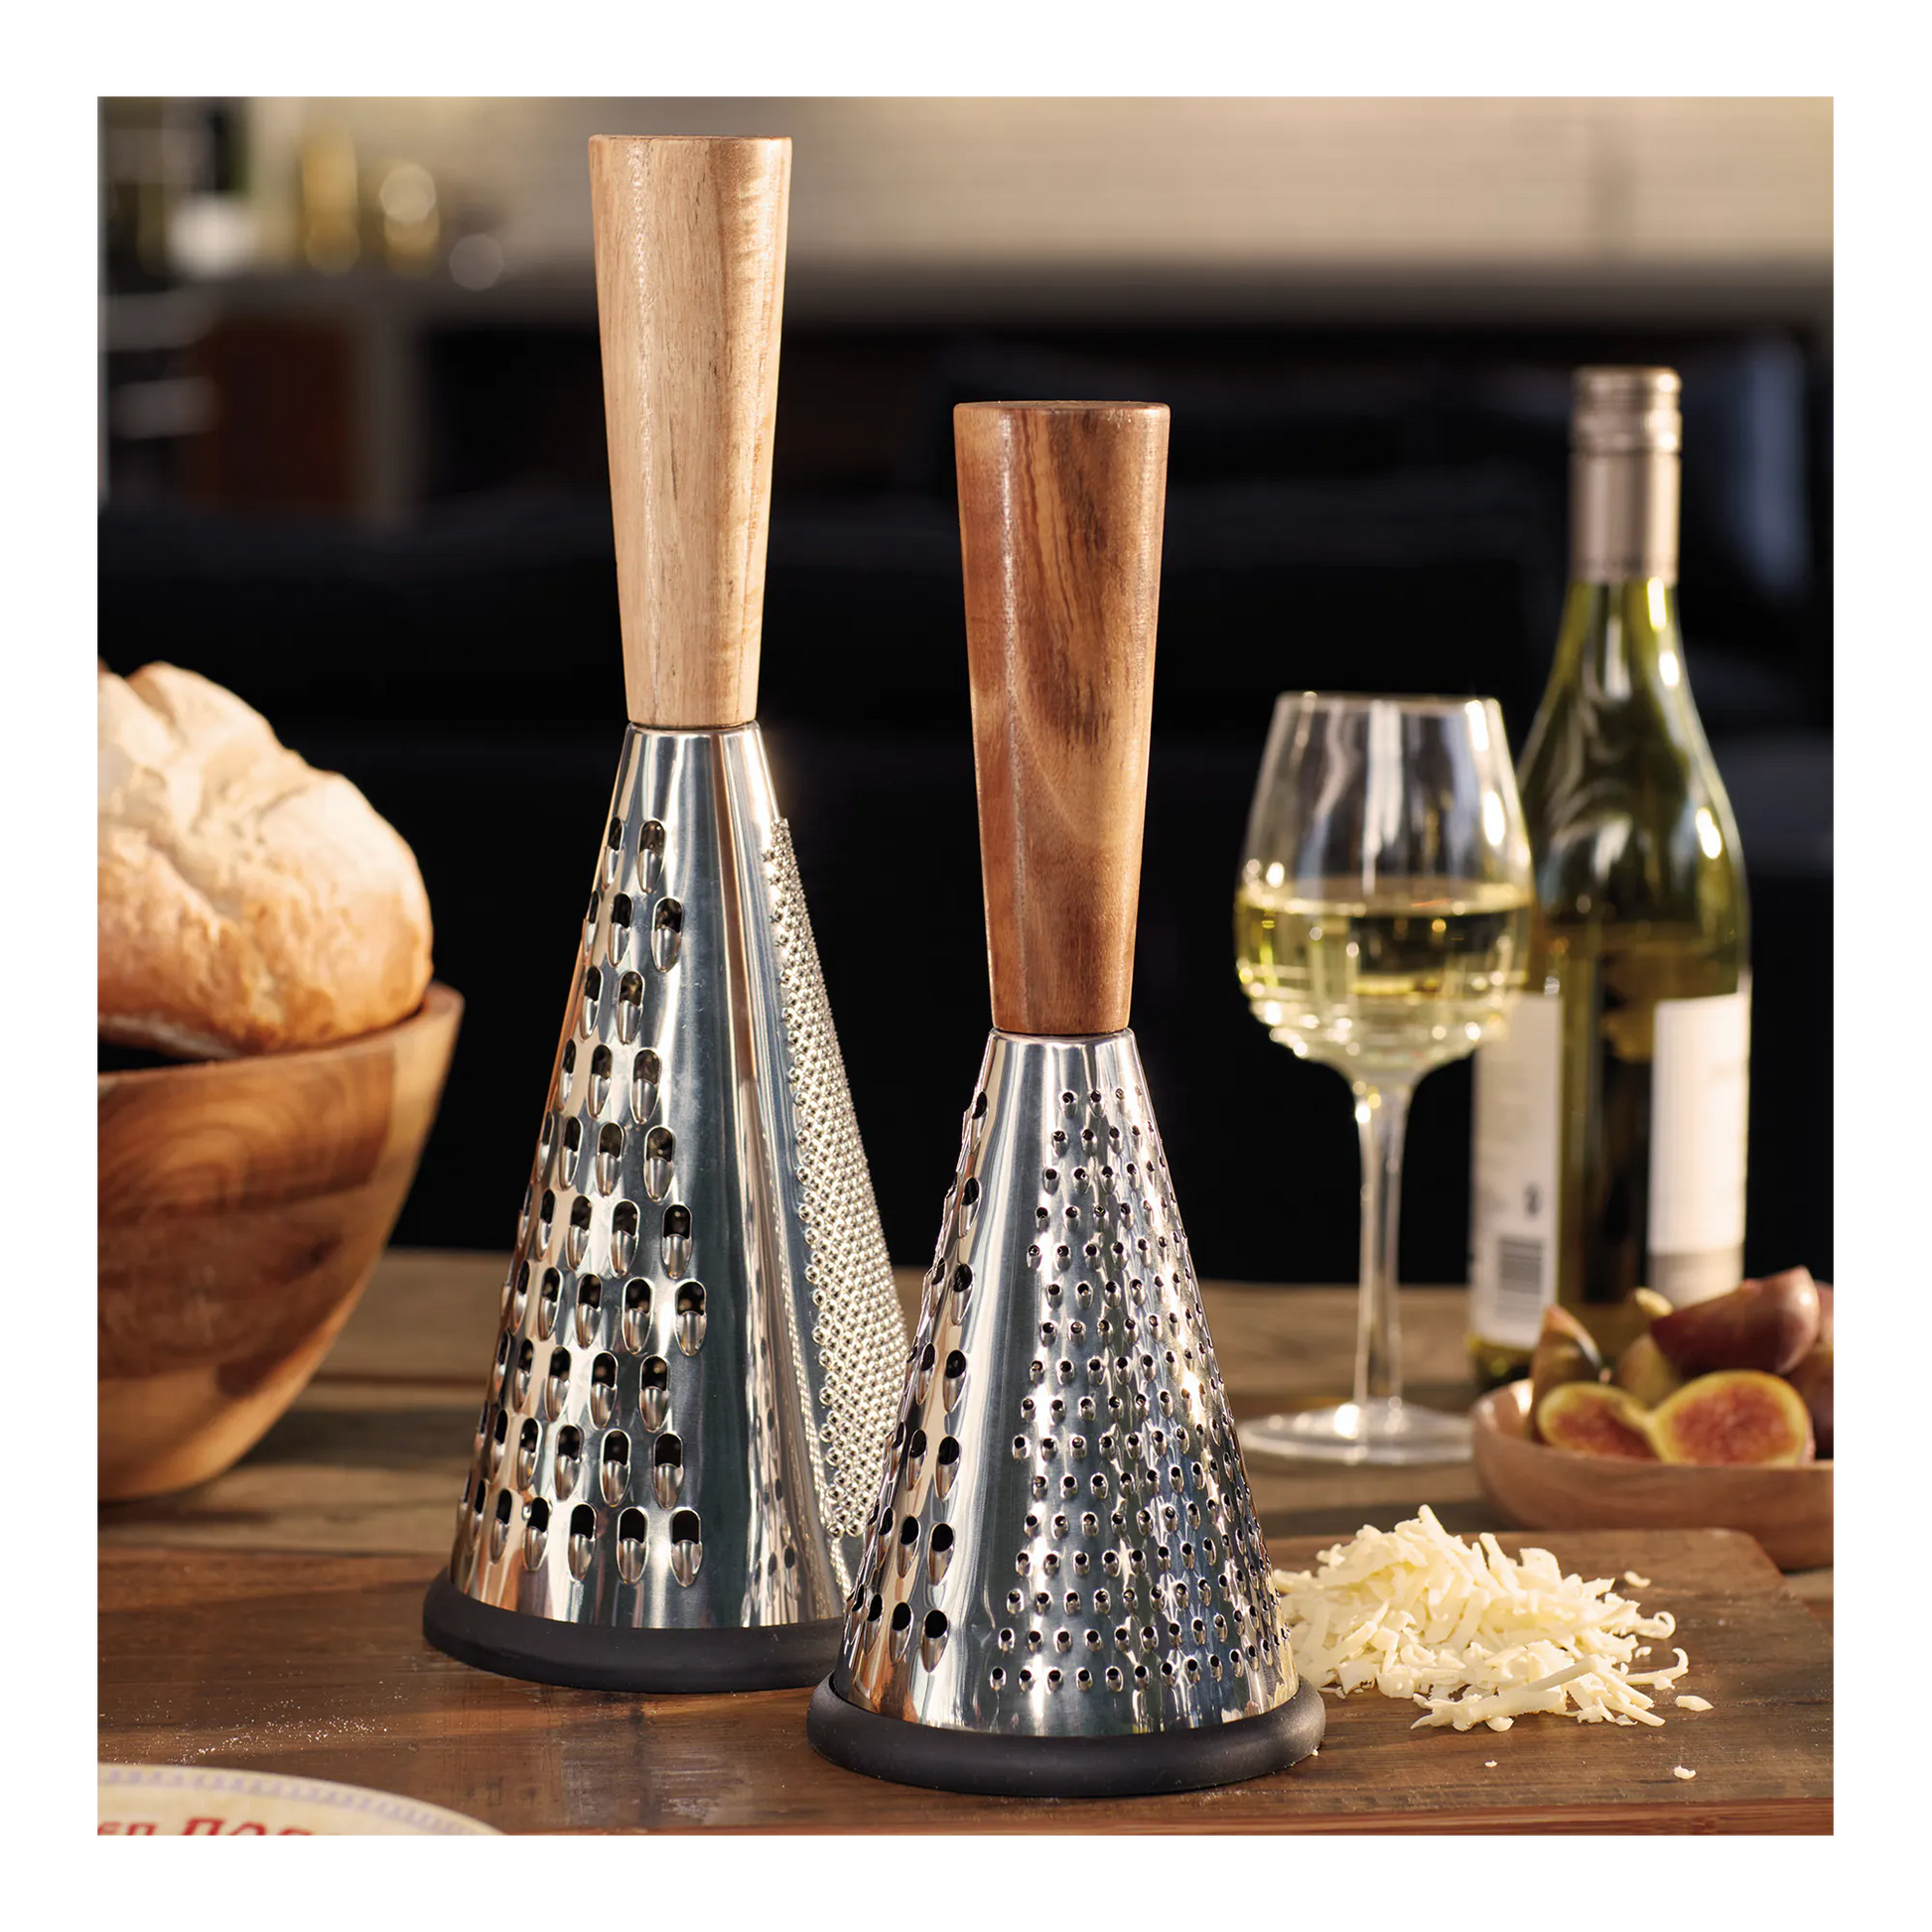 Artesa Cheese Grater with wooden Handle - Large